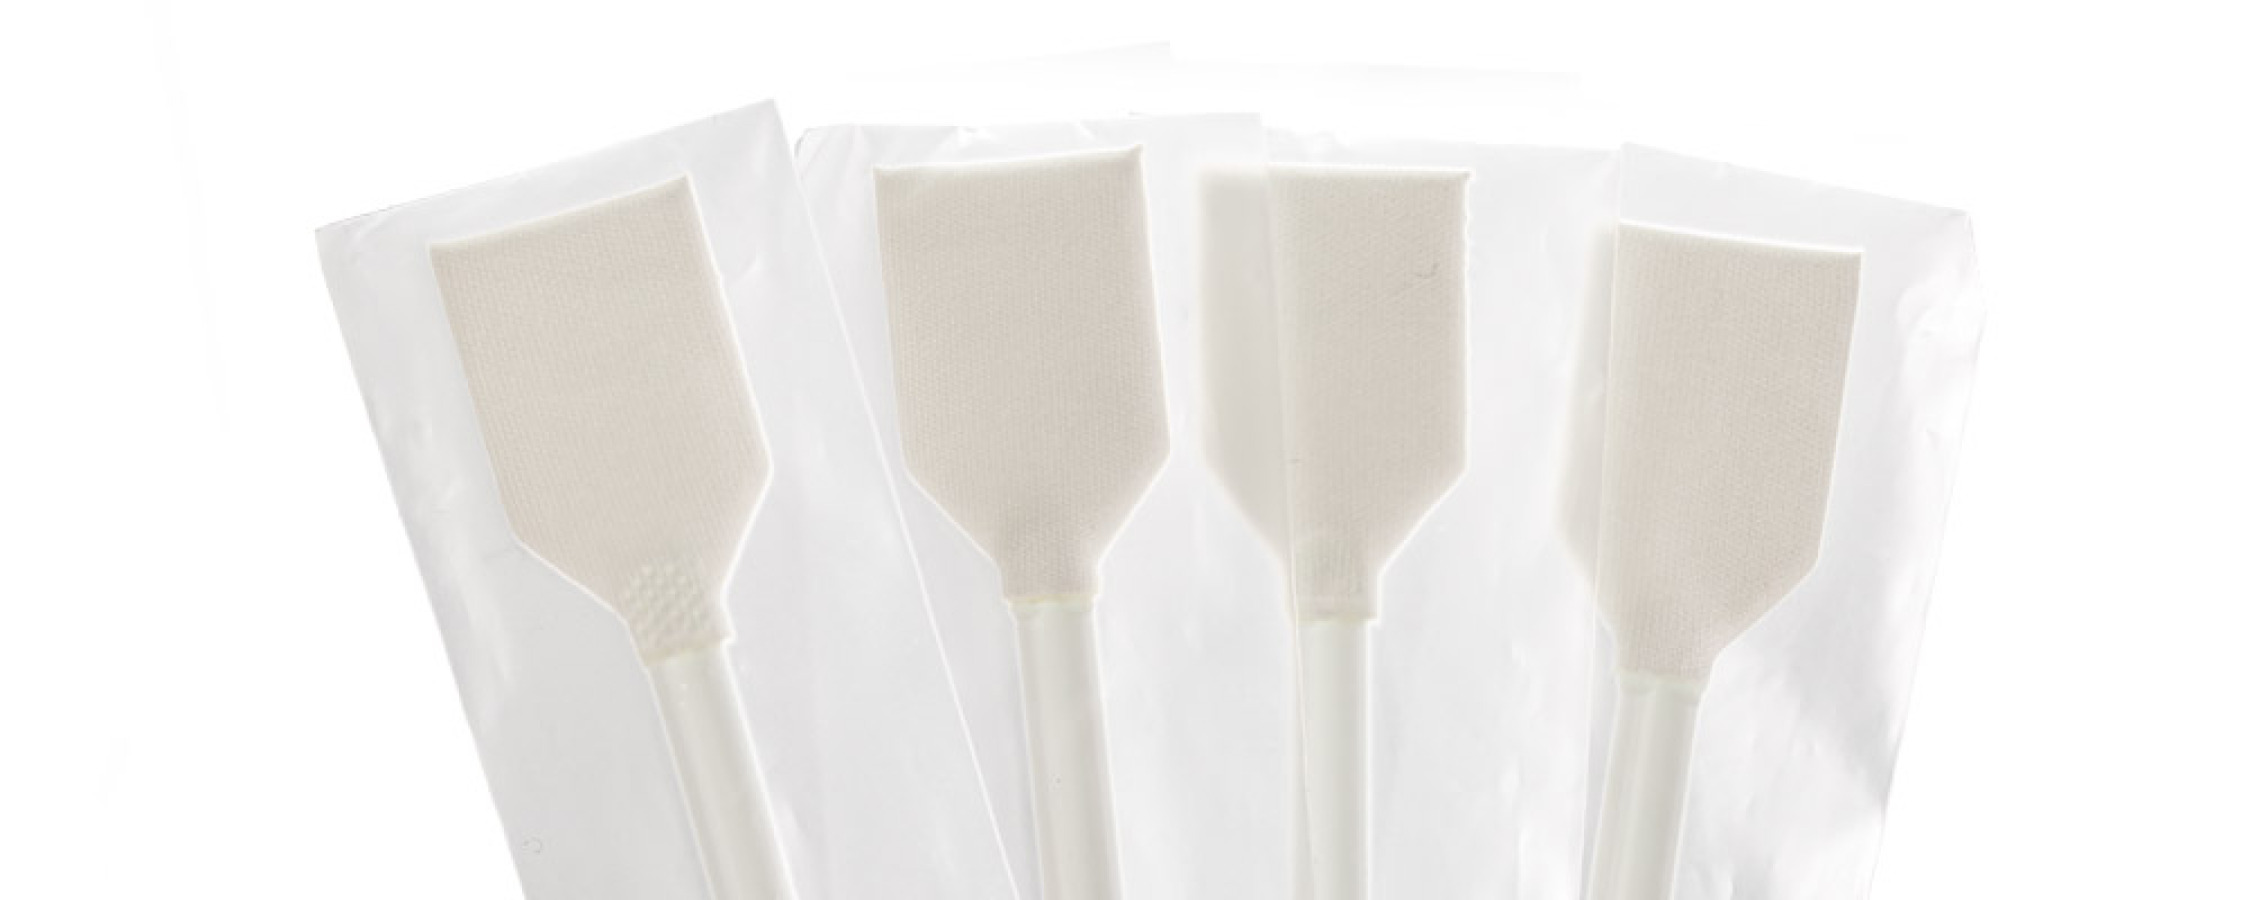 A selection of Q+ swabs in sealed packets